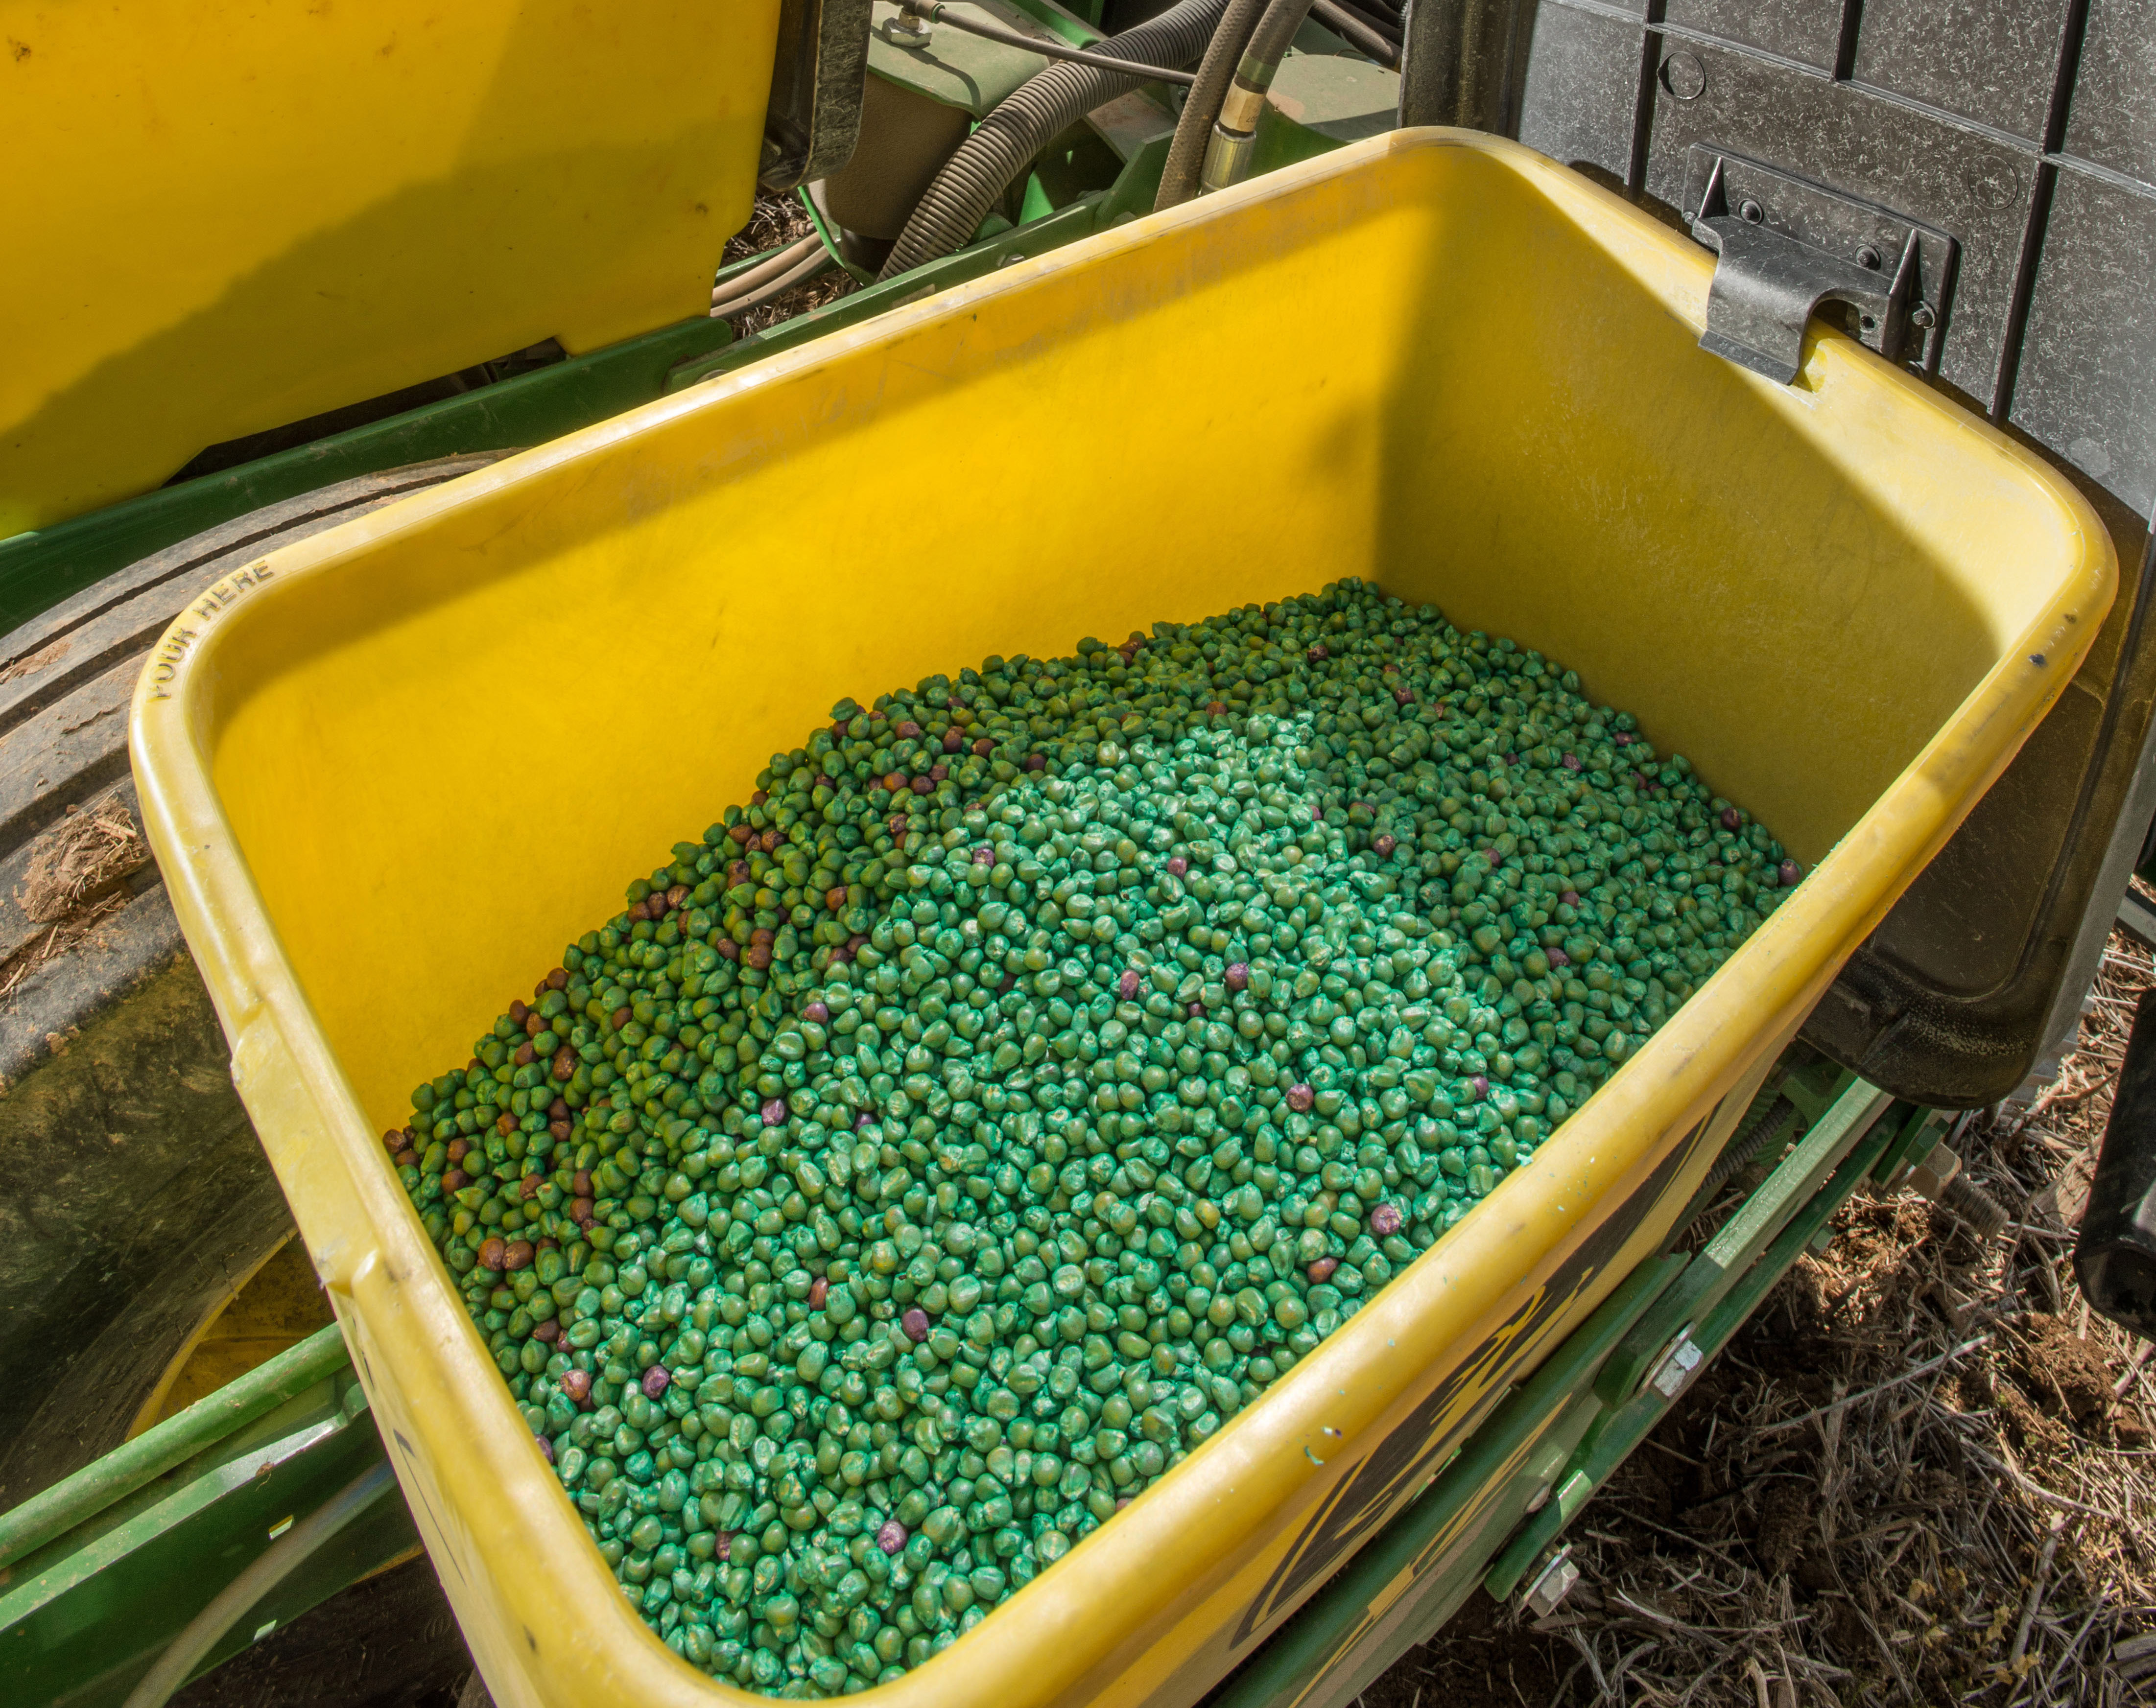 "Corn seed treated with insecticides in a planter hopper. Seed coatings are colored; here, they make the seed bright green and pink."